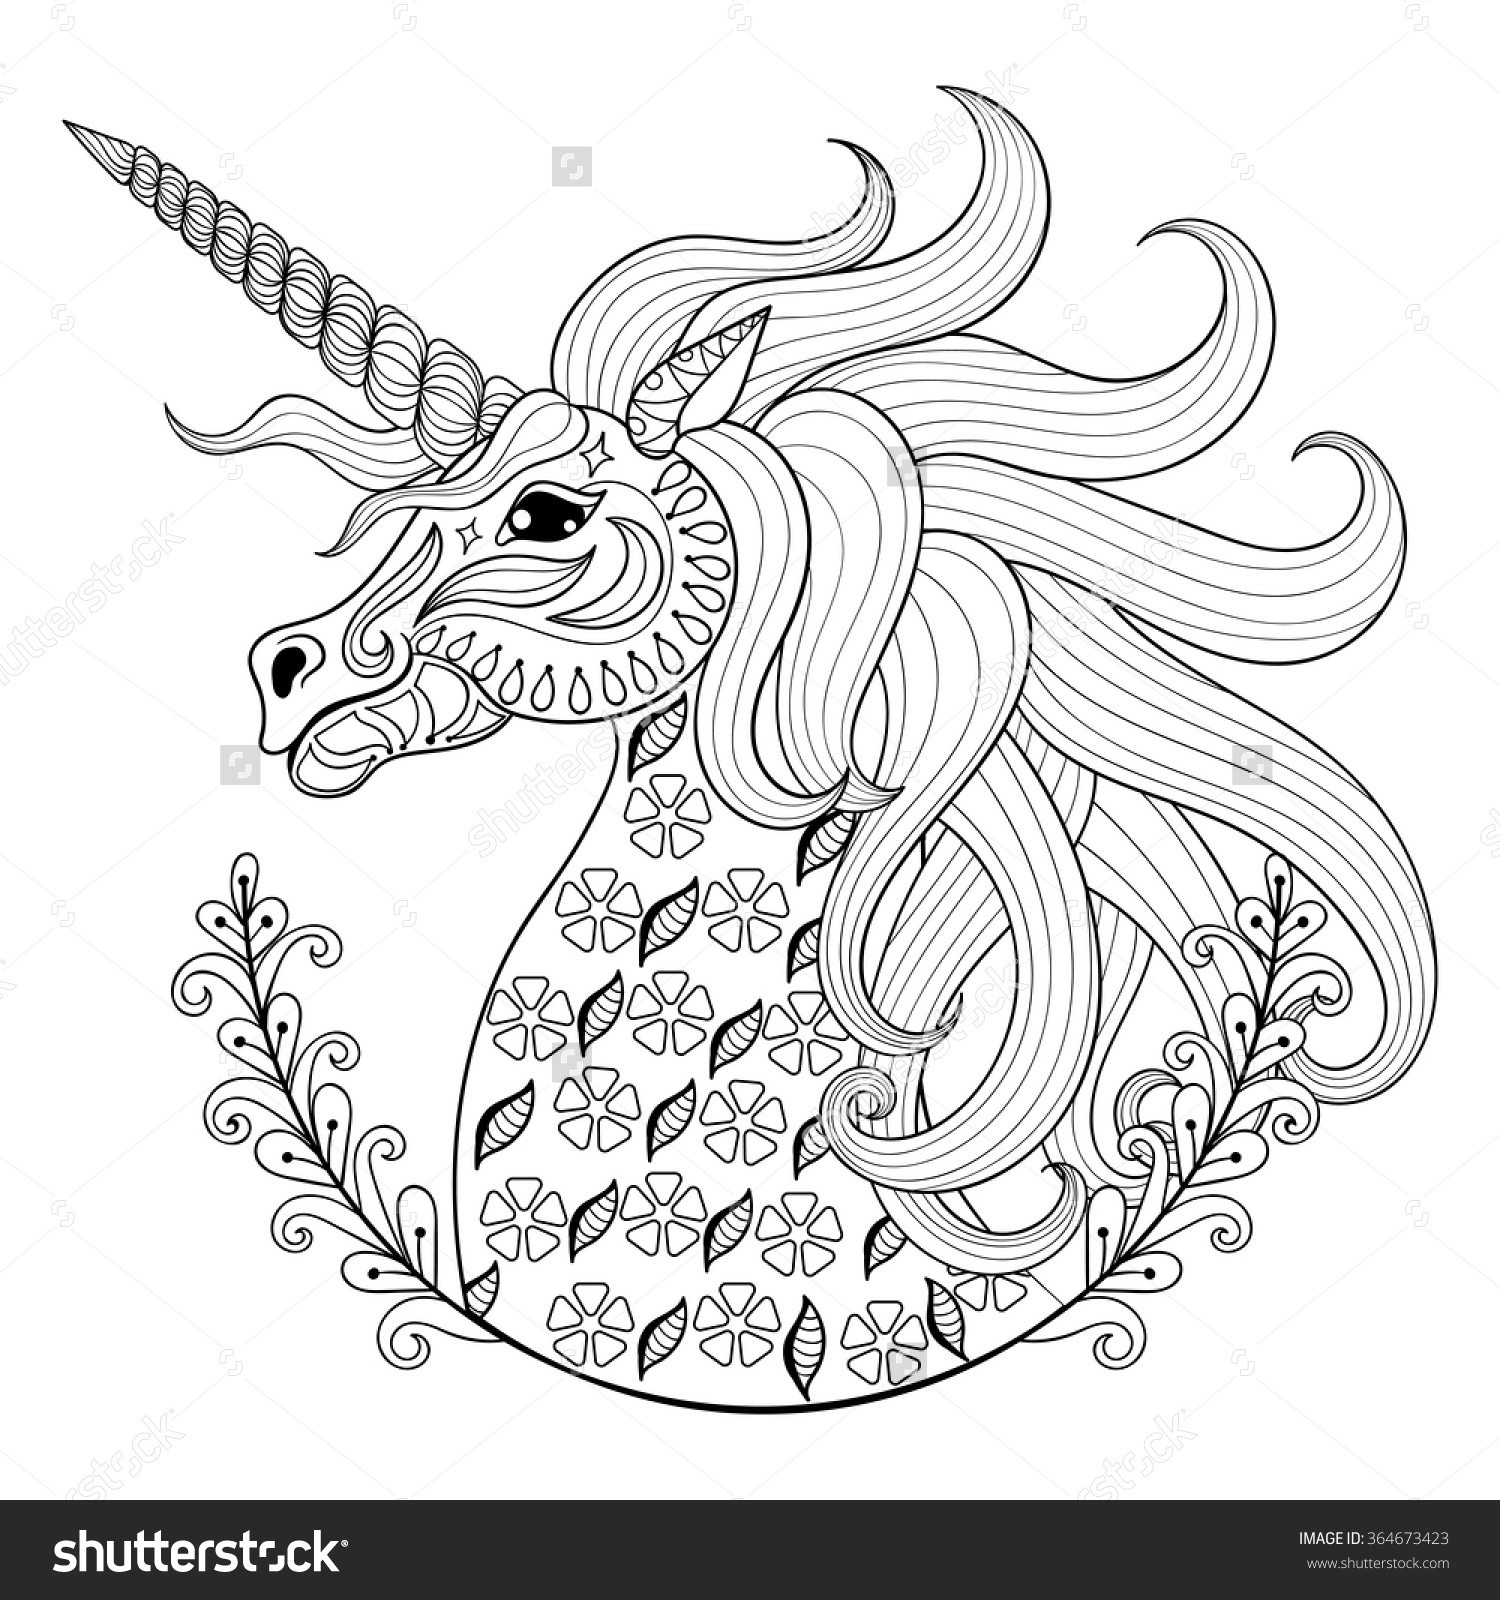 Unicorn Coloring Pages Online Coloring Ideas Astounding Inspiration Unicorn Adult Coloring Pages